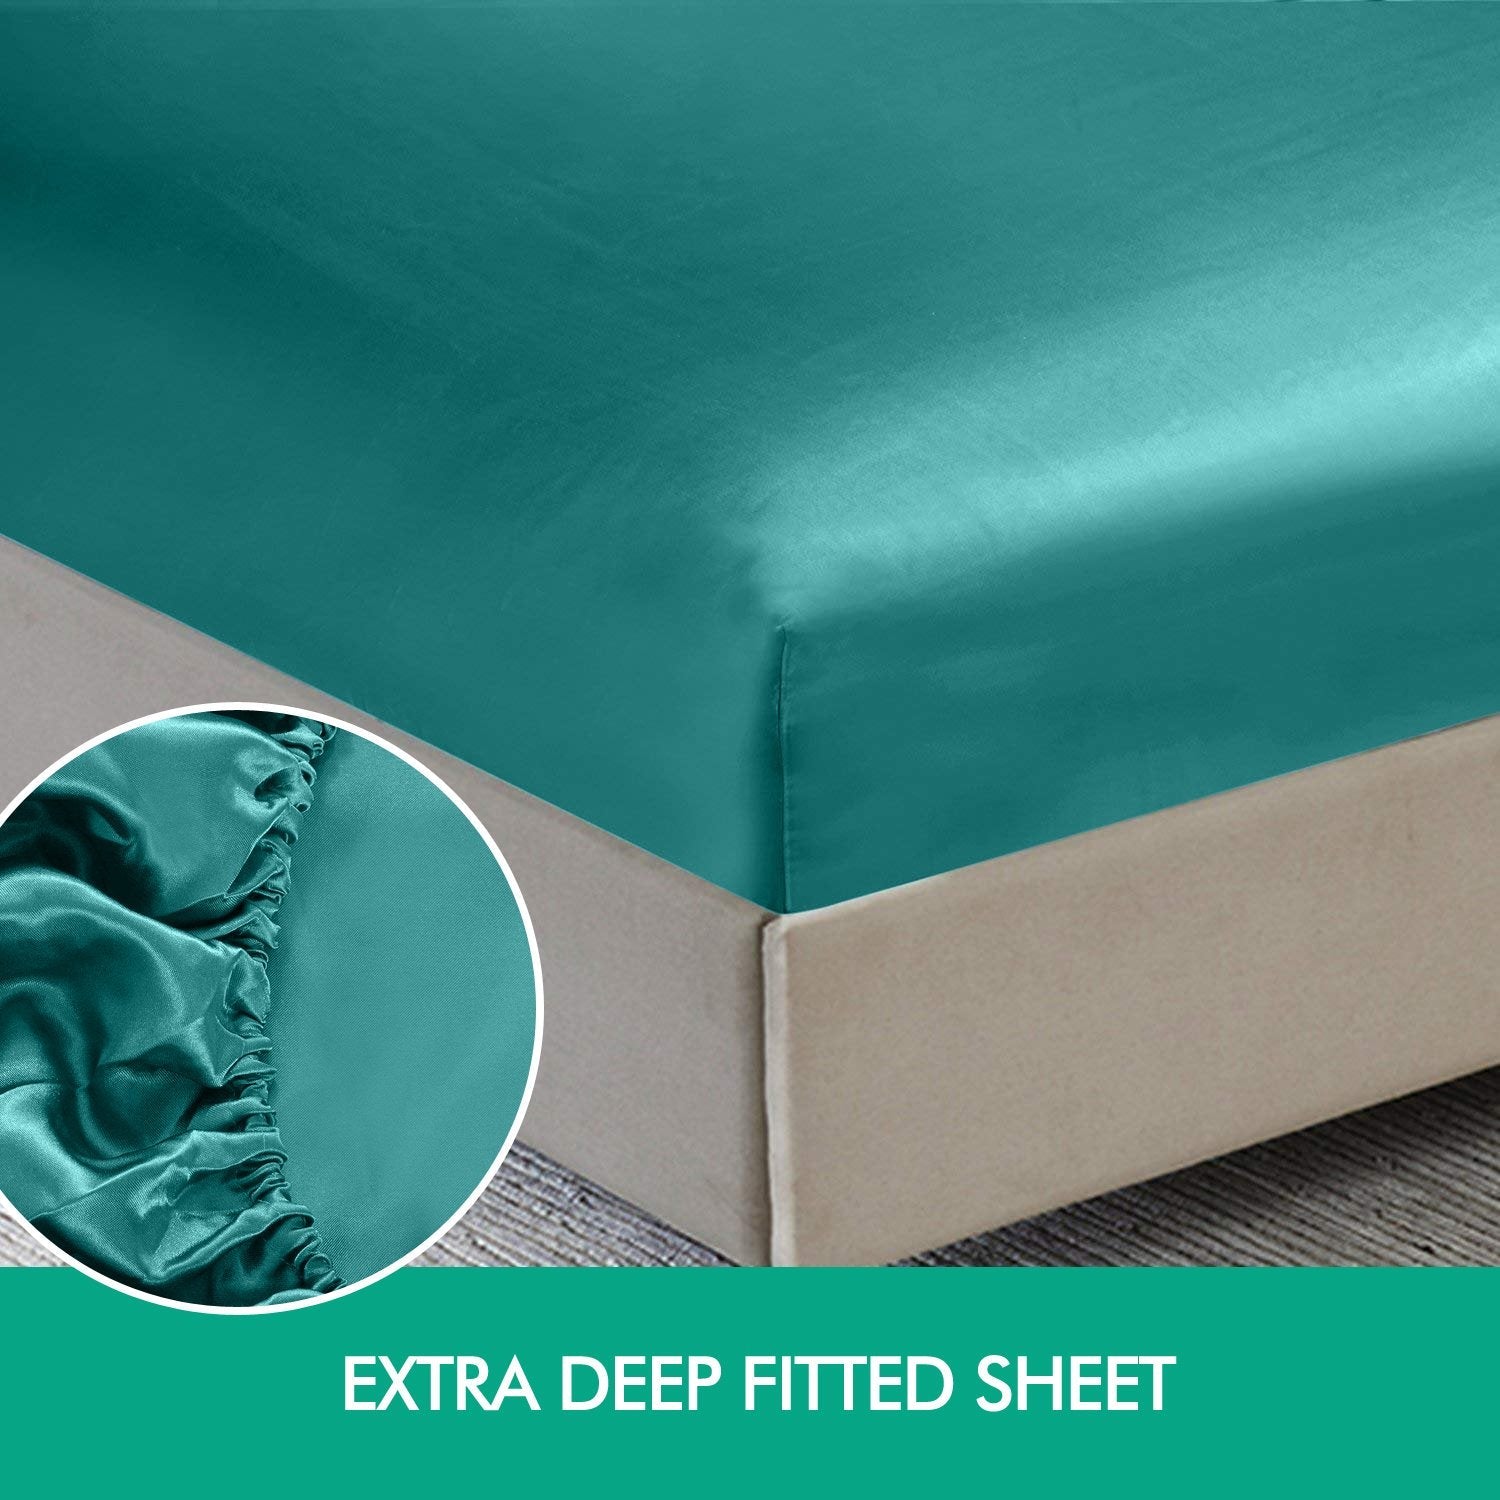 bedding Ultra Soft Silky Satin Bed Sheet Set in King Single Size in Teal Colour